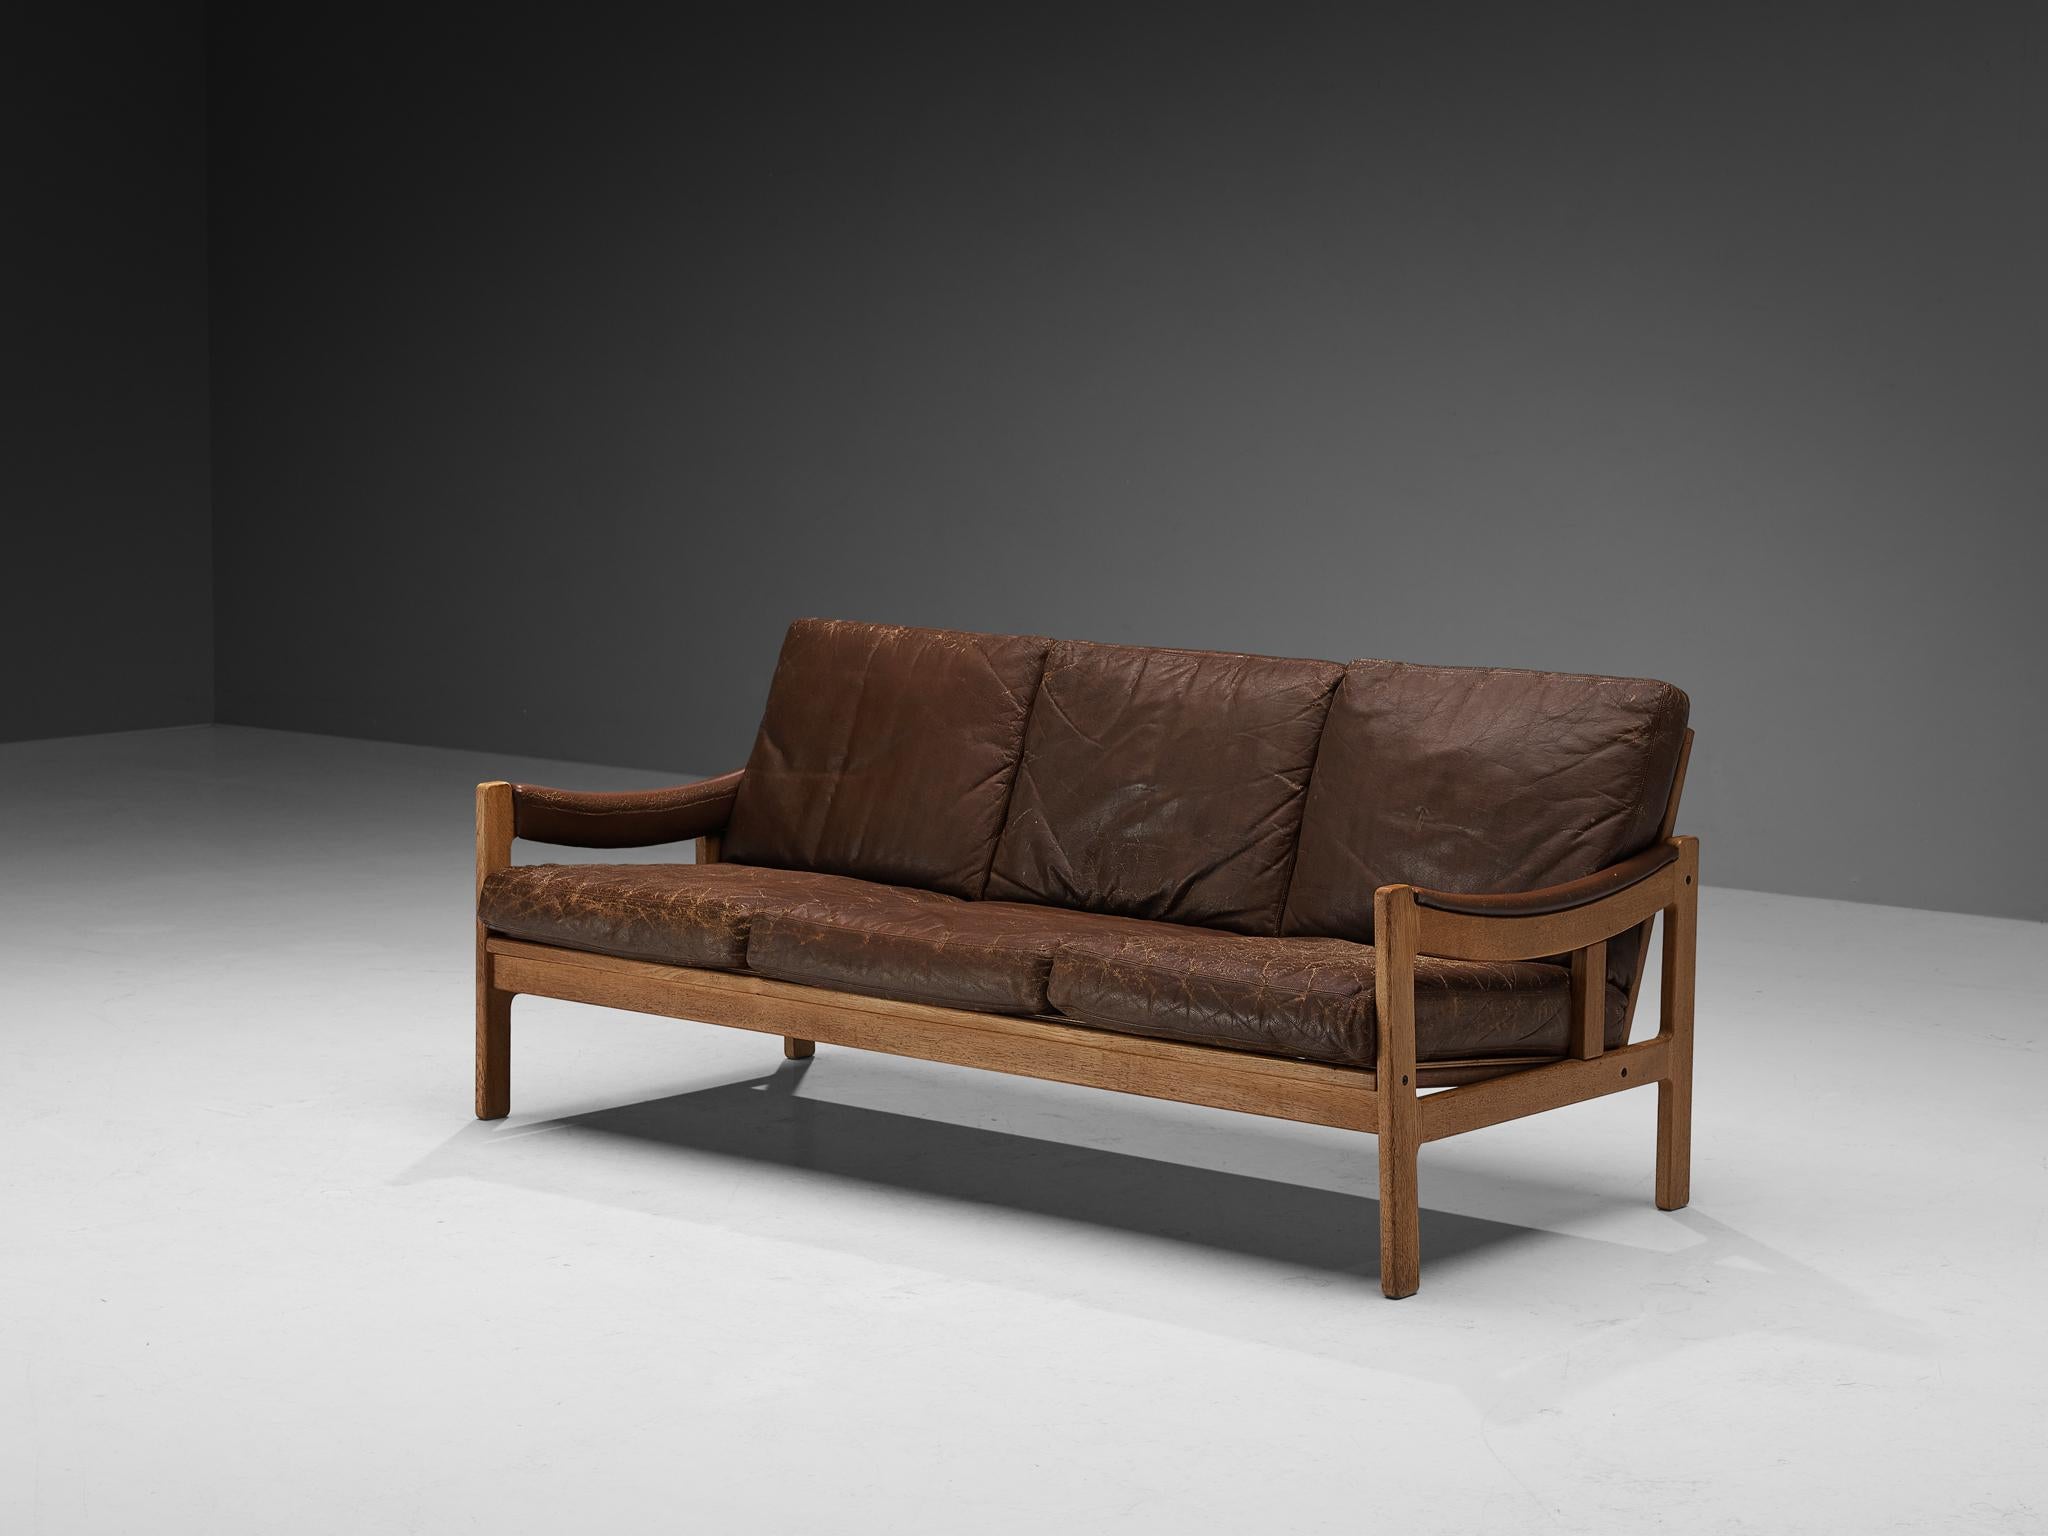 Sofa, oak, leather, Scandinavia, 1950s

This three-seater sofa beautifully reflects the stylistic traits of Scandinavian Modern Design. The base and backrest are pure and clear in their execution, giving the sofa both a simple yet stately